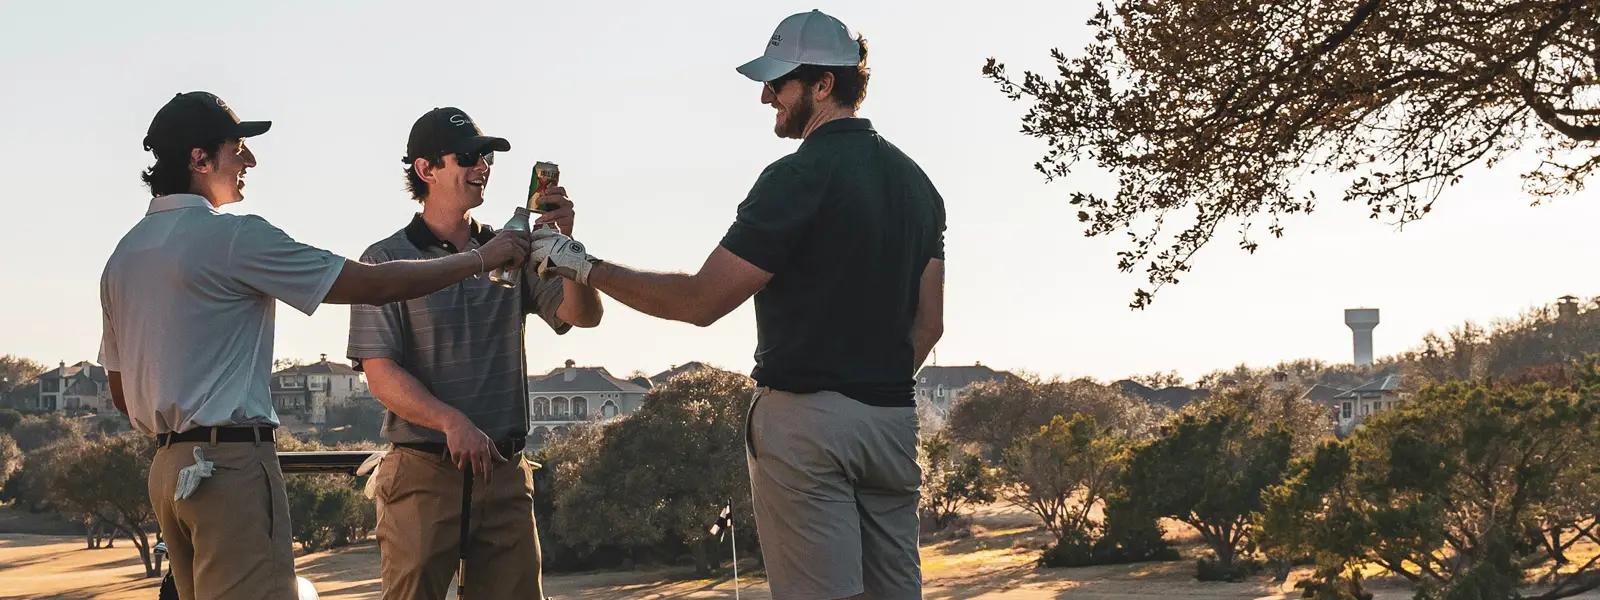 Men golfing and toasting each other with canned bear